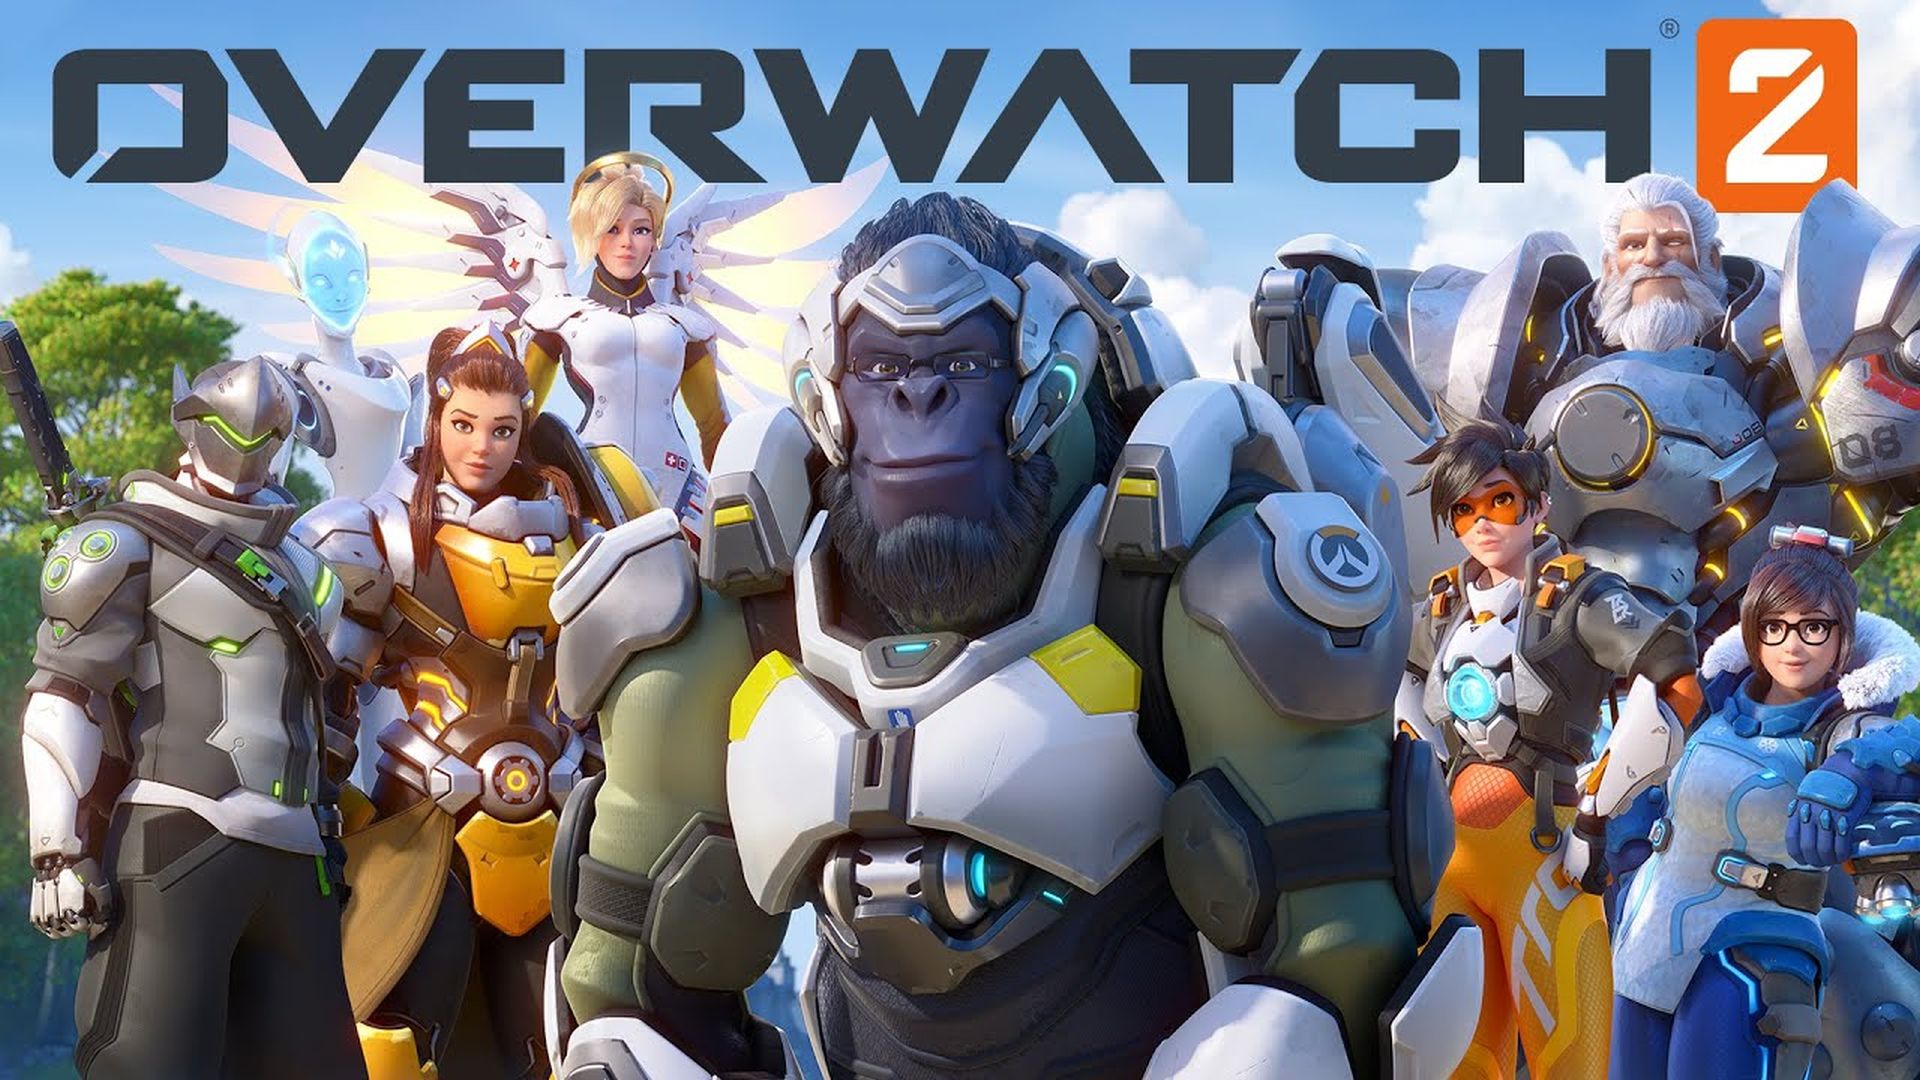 Overwatch 2, Diablo 4 Not Launching in 2021 – Activision Blizzard